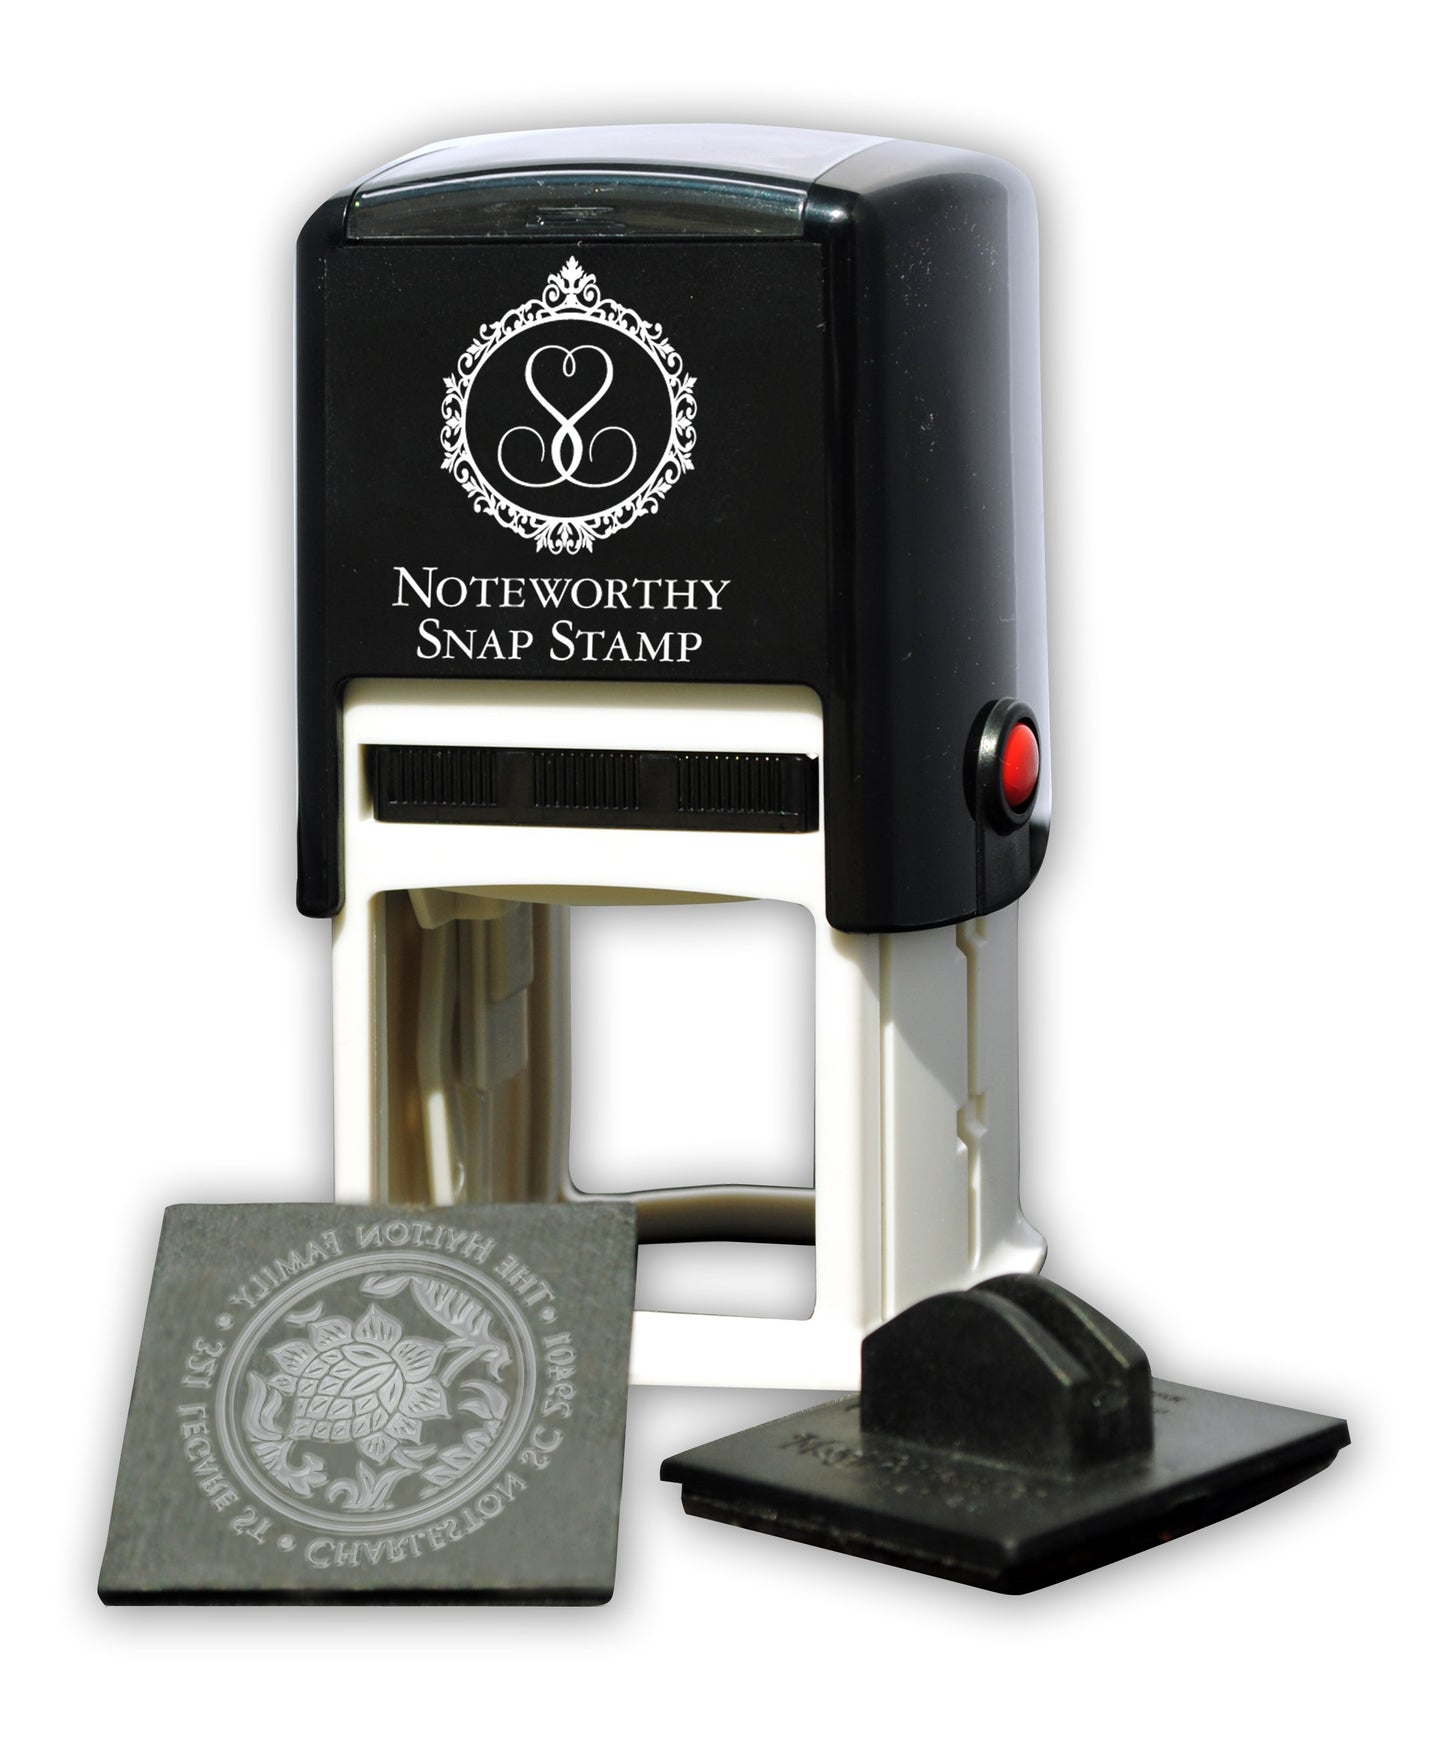 Capital of New Jersey Square Stamper or Embosser